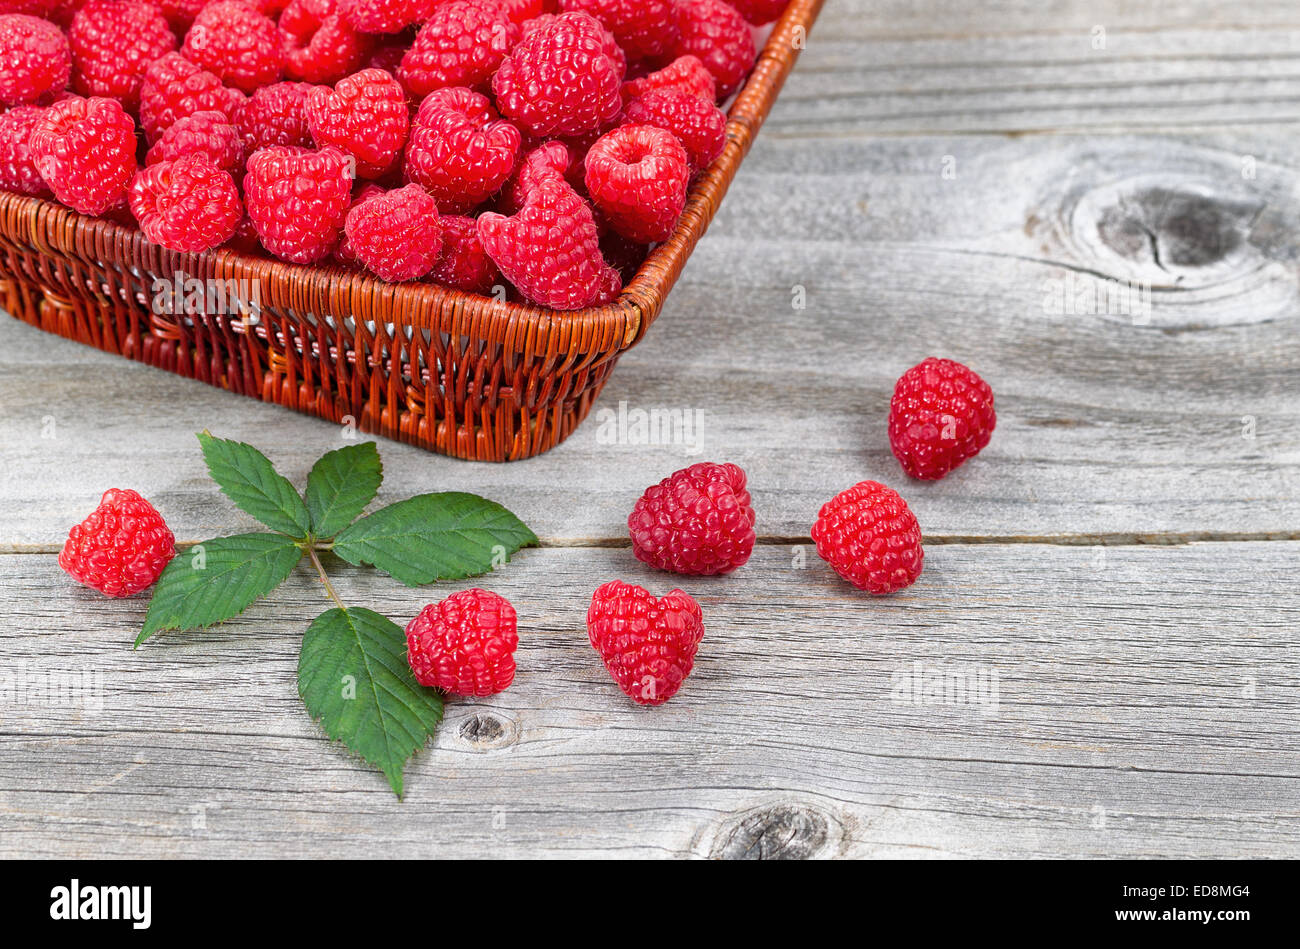 Close up of a basket filled with fresh Raspberries, some falling out, on rustic wood with berry branch leaf. Stock Photo